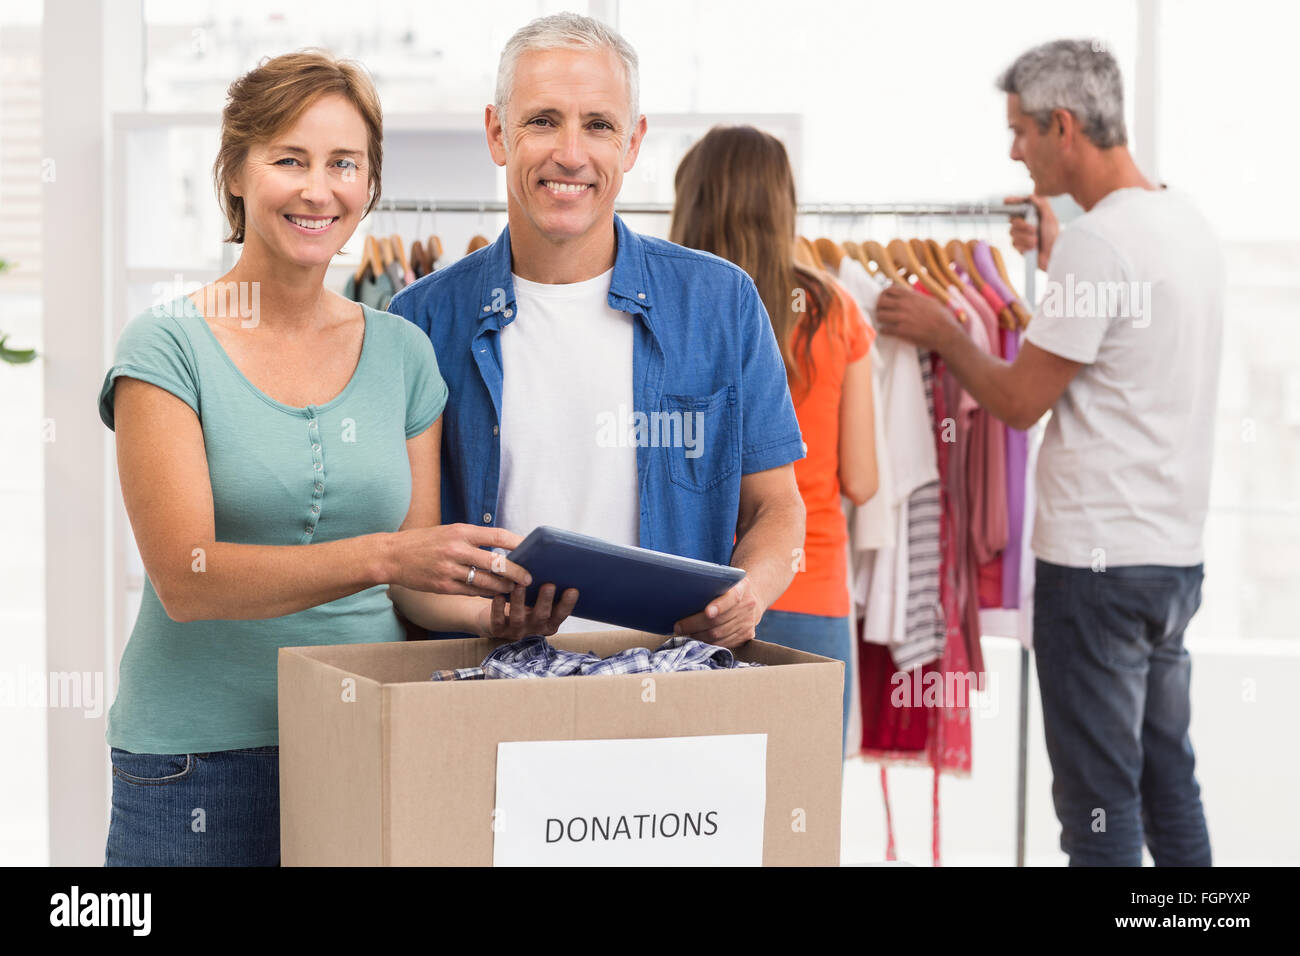 Smiling casual business colleagues with donation box Stock Photo